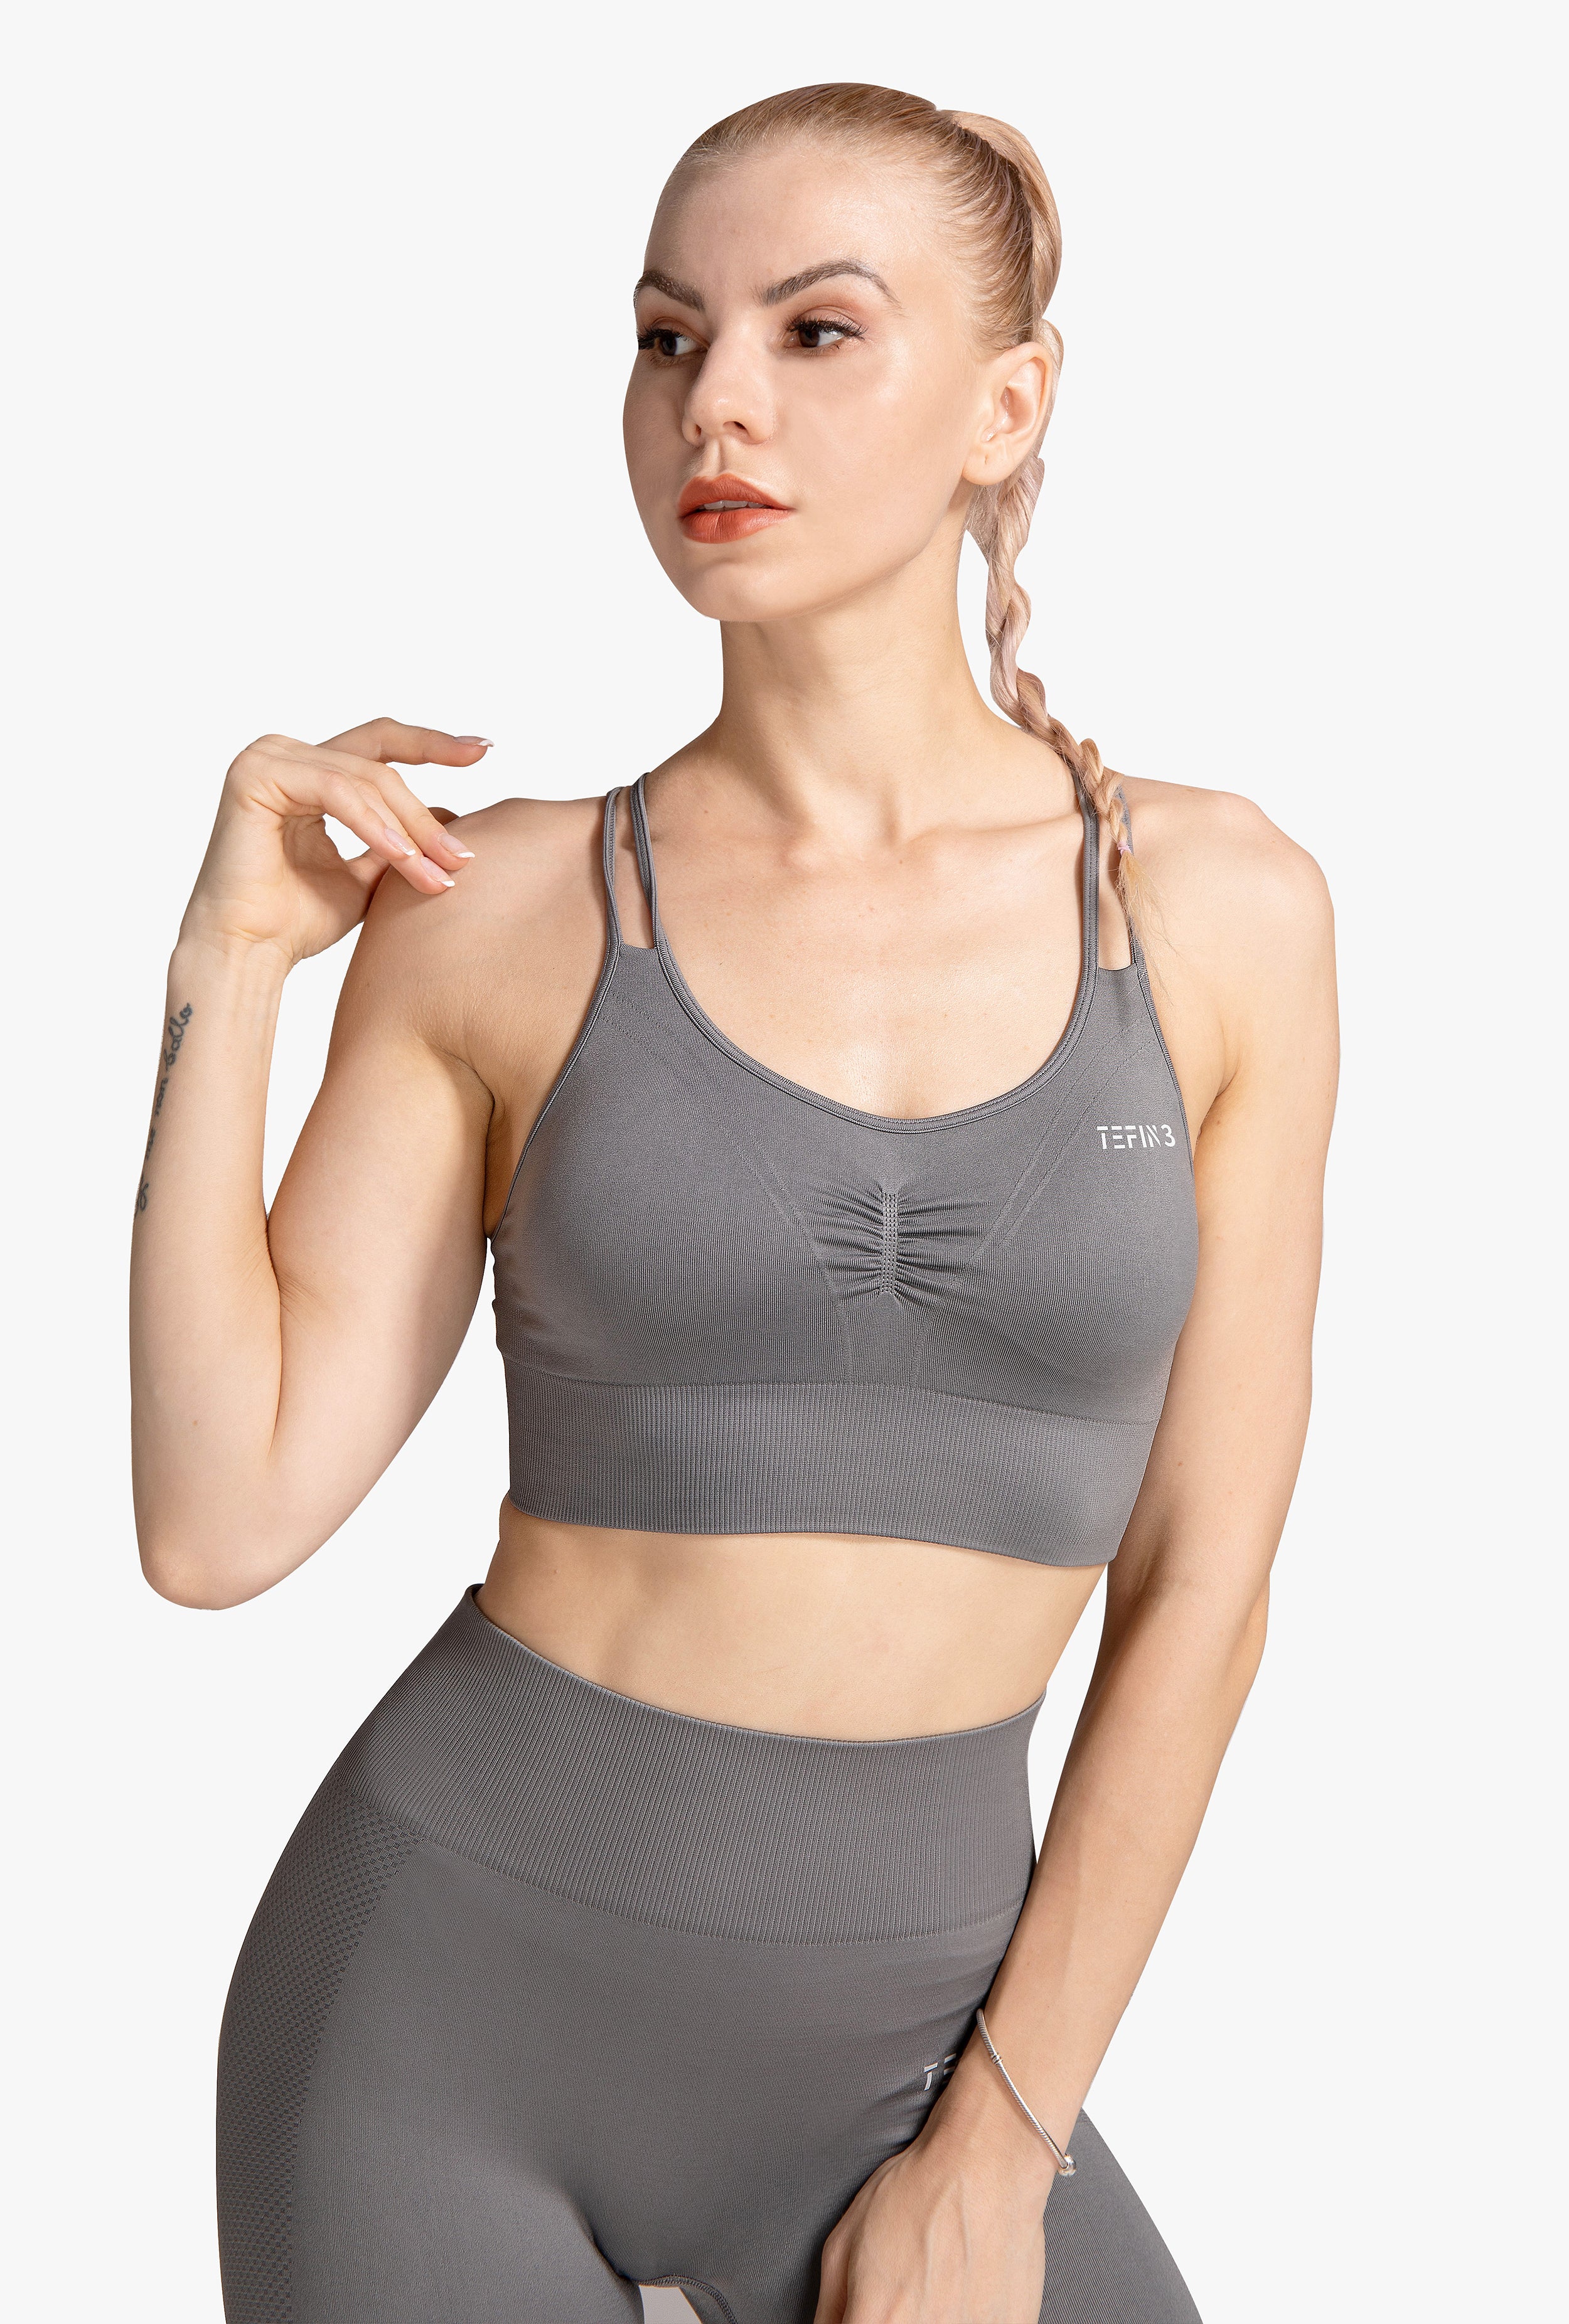 Myprotein - Your Style, your Shape The Shape Seamless Sports Bra is  constructed with unique knit technology to blend sweat-wicking with sleek  style. Available in Black and Light Blue Marl 😍 📸